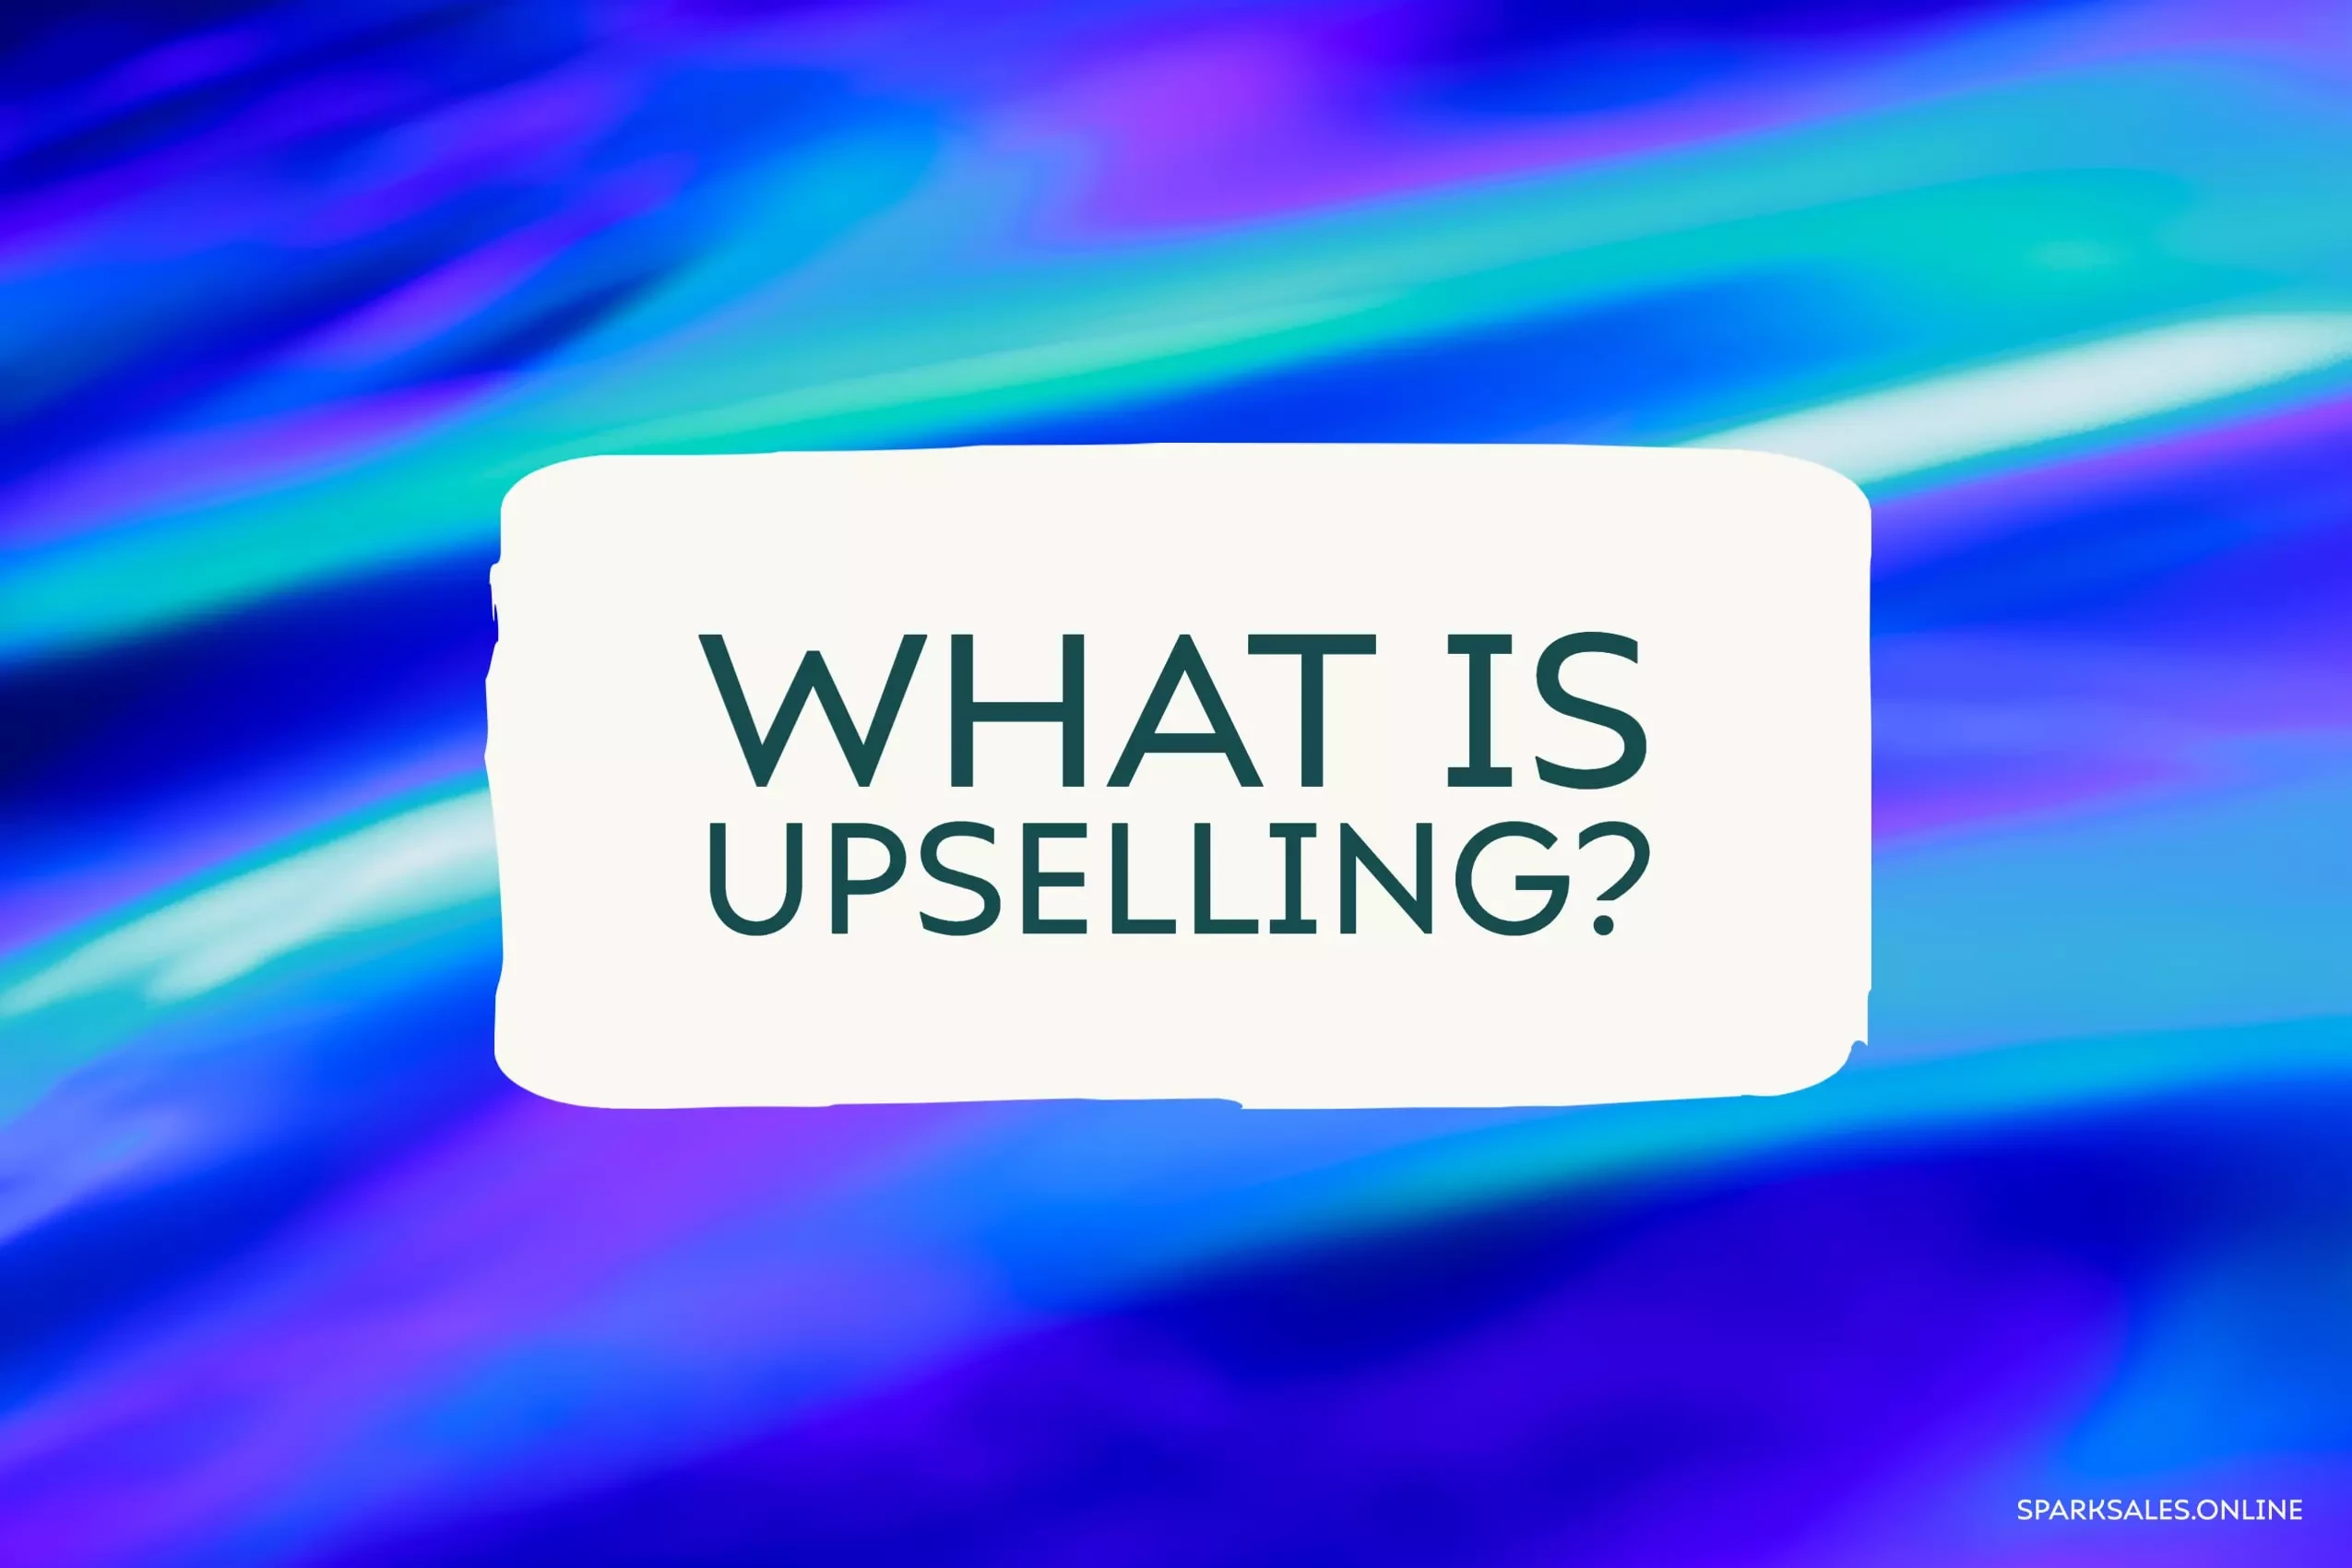 What Is Upselling?